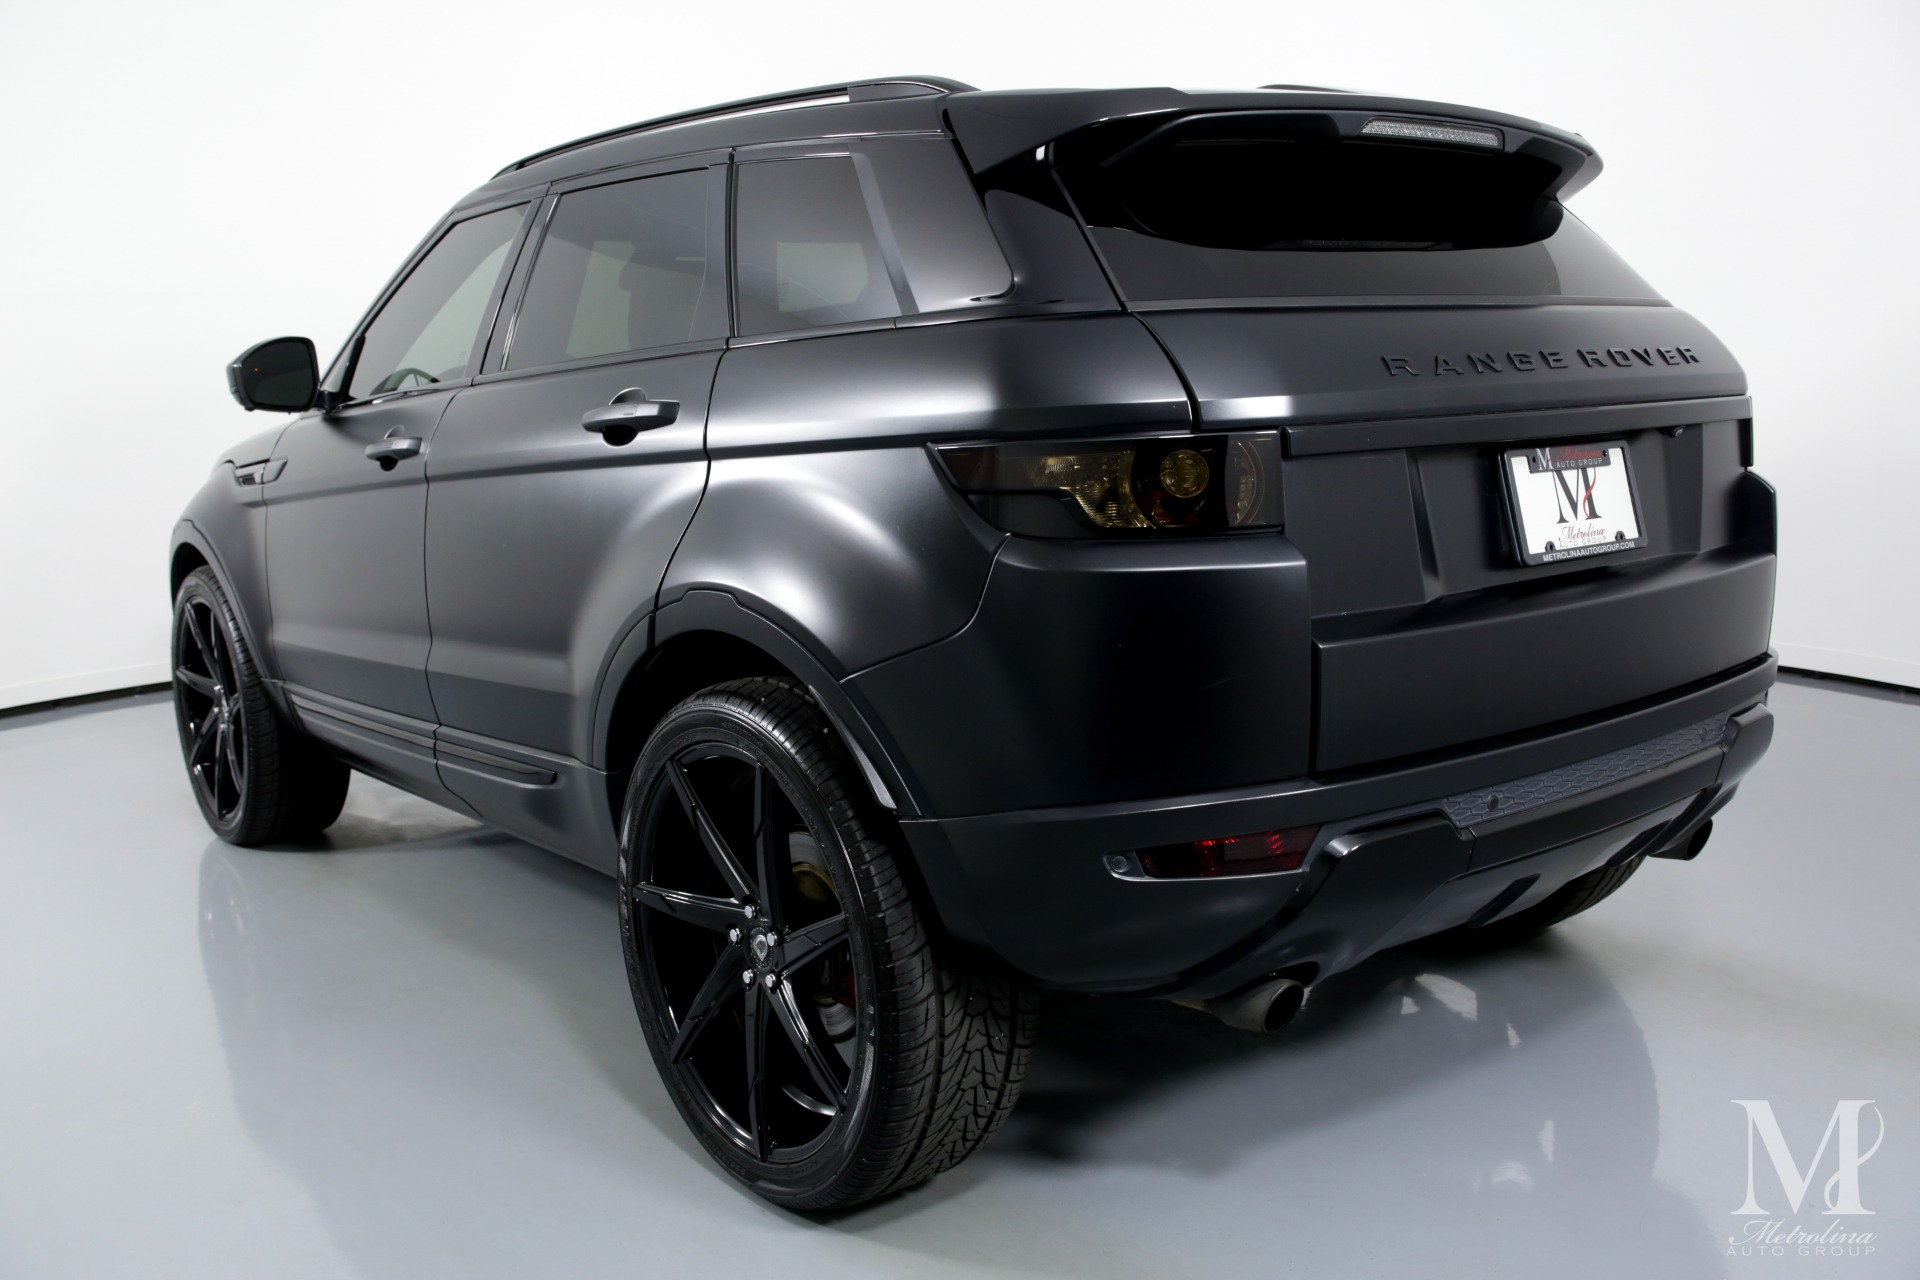 Used 2015 Land Rover Range Rover Evoque Pure Plus AWD 4dr SUV For Sale ...